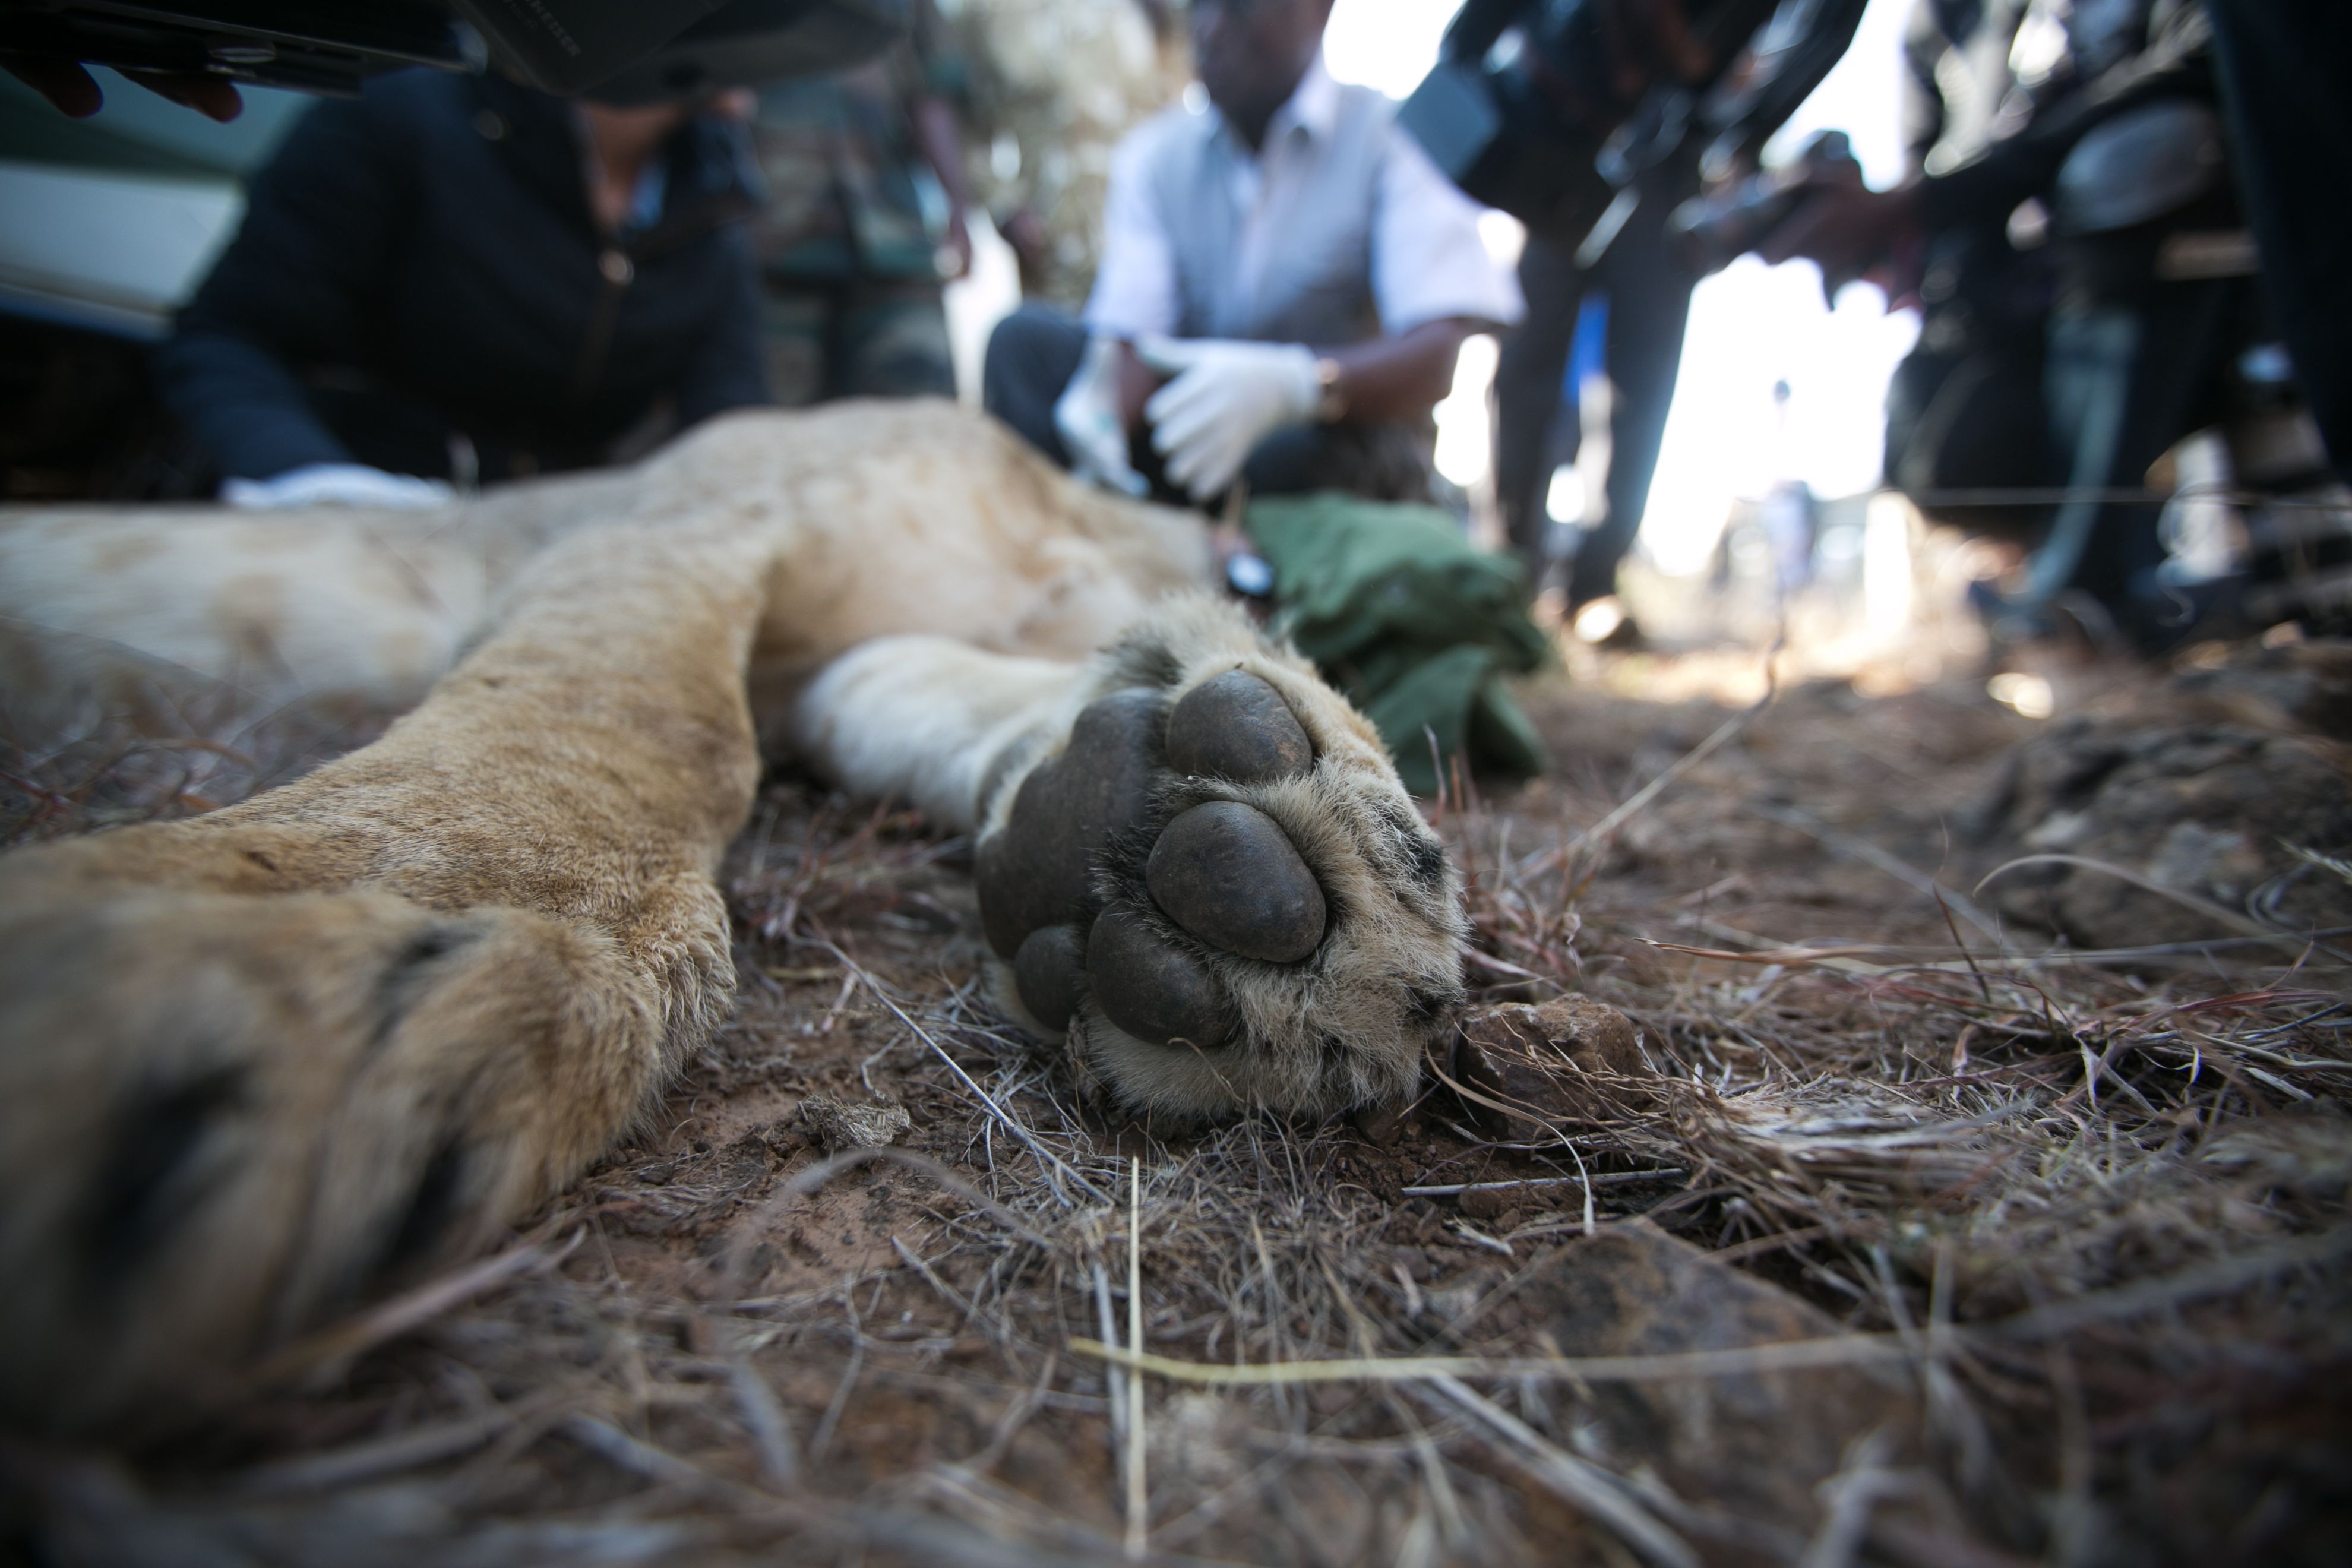 Veterinarians from the Kenya Wildlife Service affix a tracking collar to a tranquilized lion. Image by Immanuel Muasya. Kenya, 2017